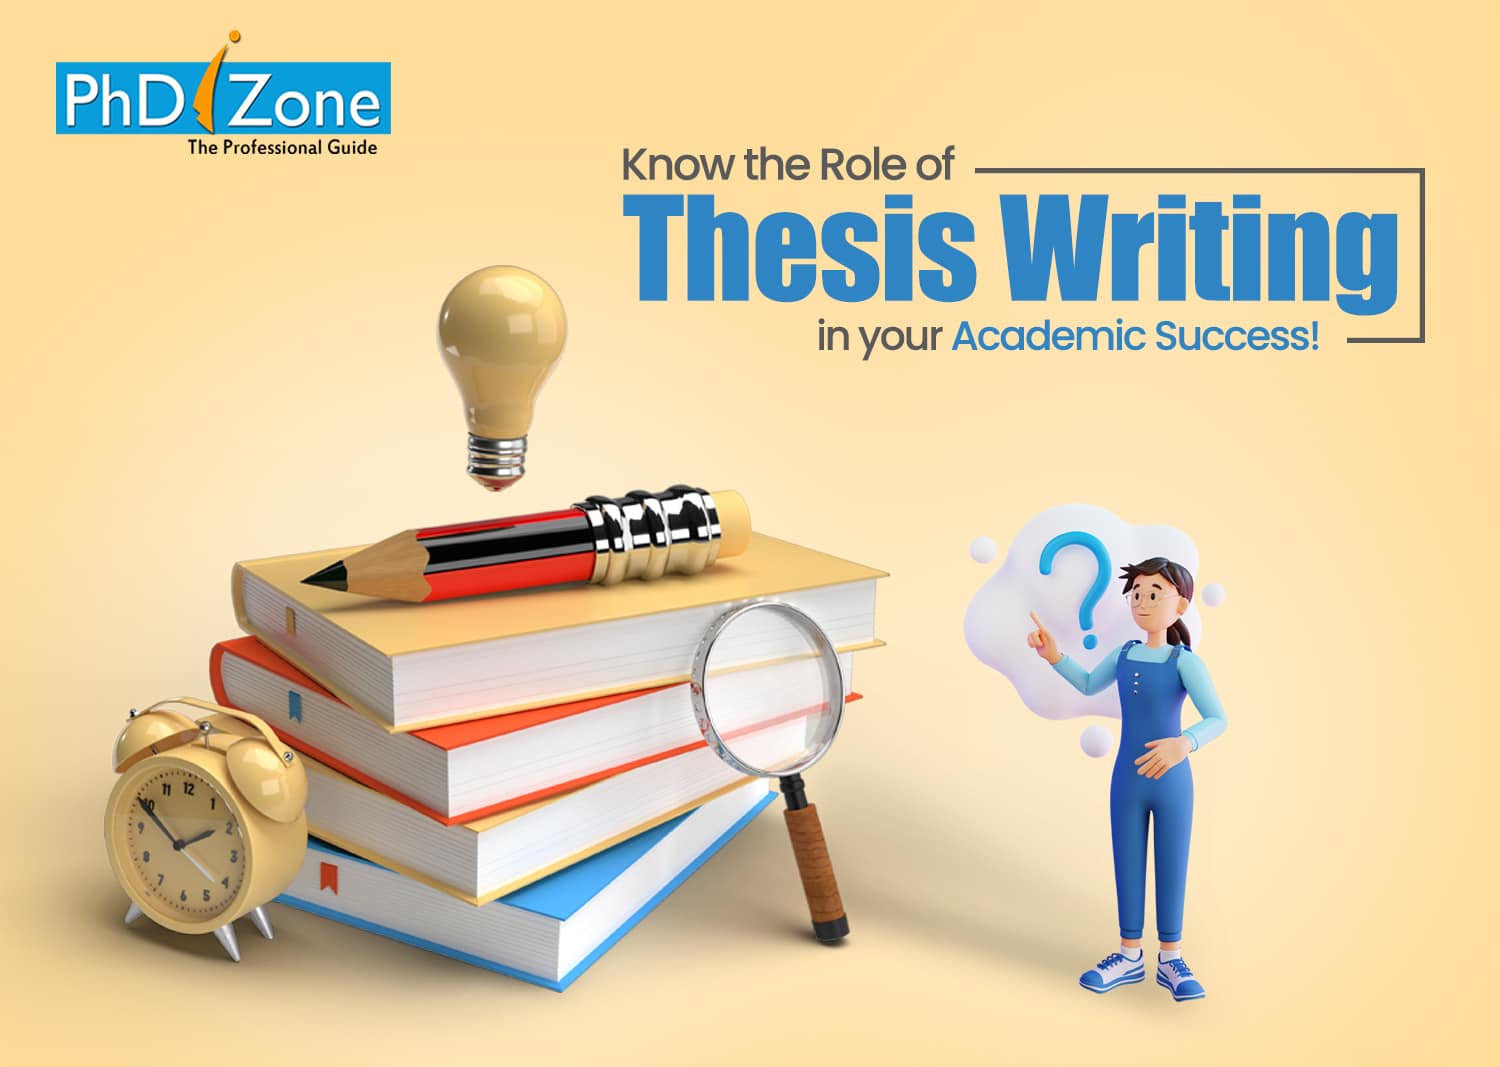 thesis writer in lahore